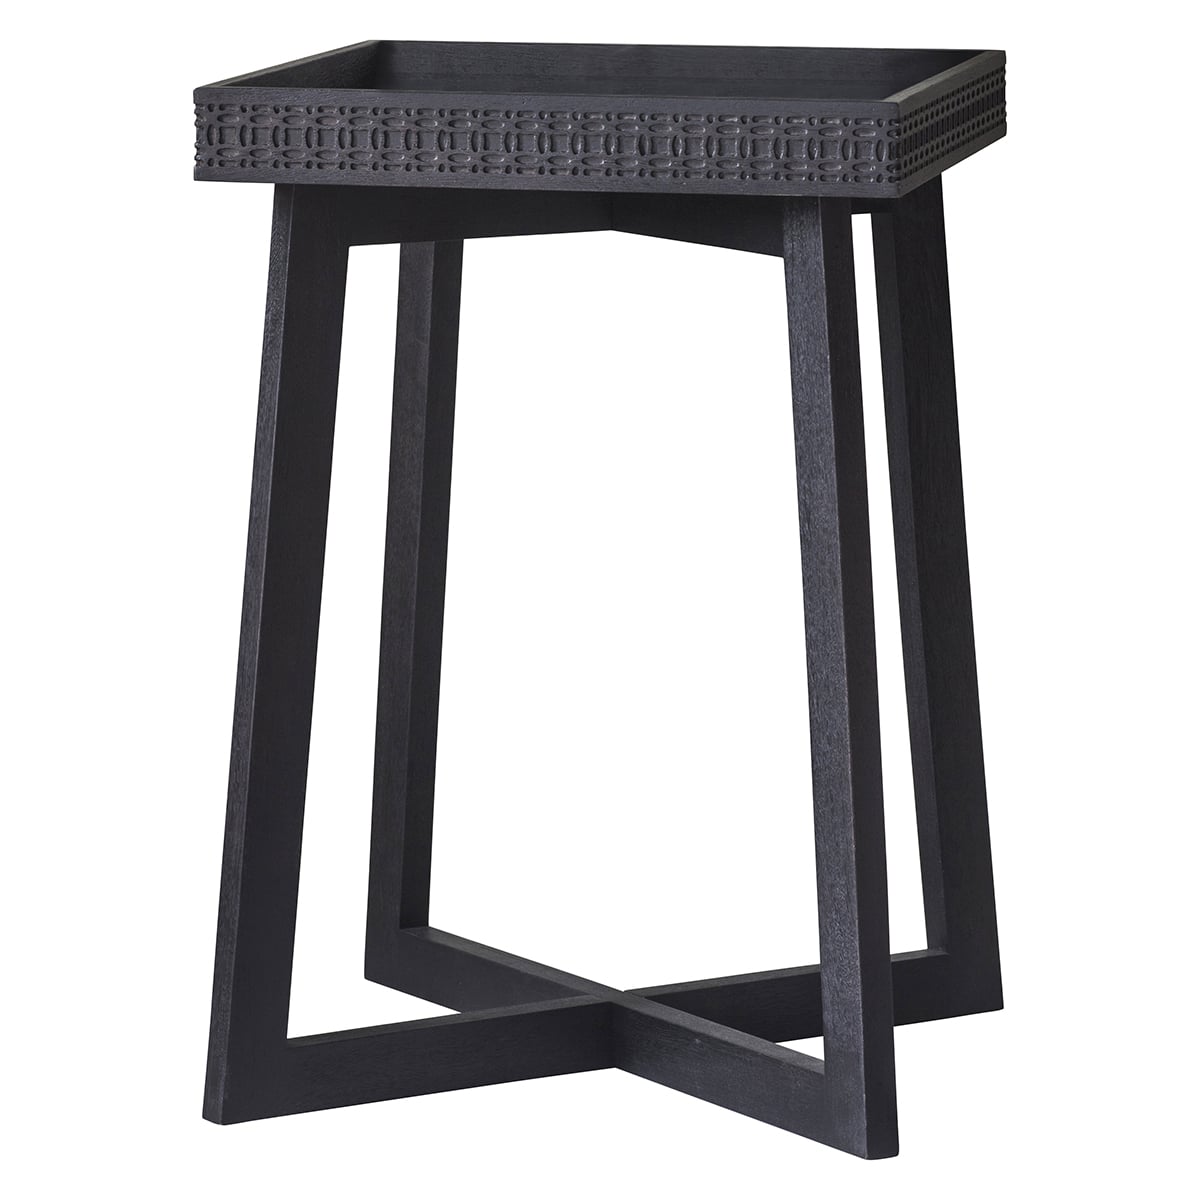 Product picture of the side table with blind fretwork on sides of the tray-like table top and cross legged base in black